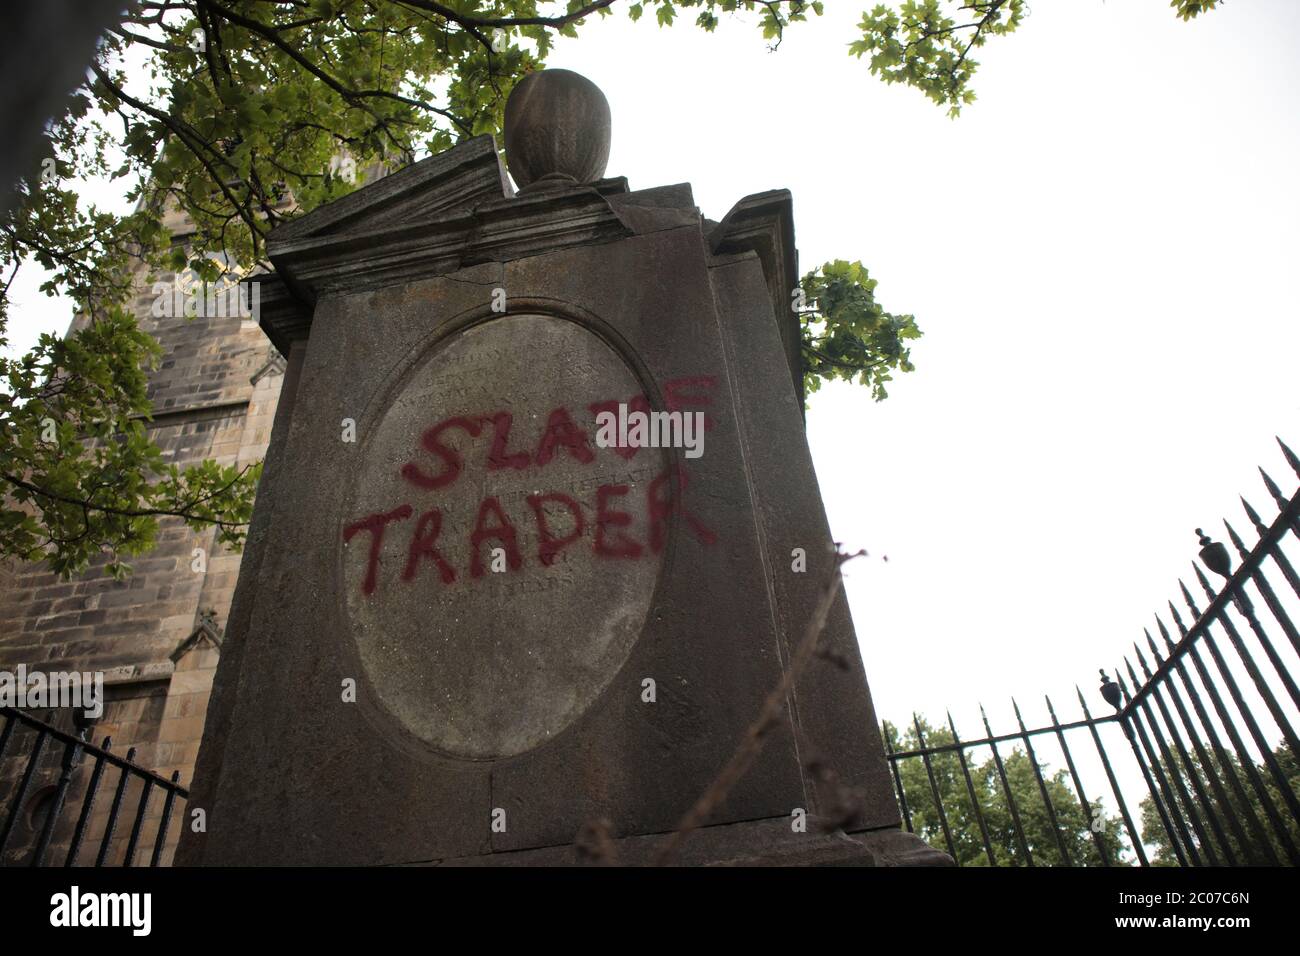 Lancaster, United Kingdom 11th June 2020, Whilst many monuments have been cleaned up following Black Lives Matter in the UK the Graffiti remains on the Rawlinson Family Vault in Lancaster, The Rev Chris Newlands, Vicar of Lancaster, has described the way in which vast sums of money were made during the slave trade as an 'abomination' to the lasting shame and regret, of the City. He said that he was not endorsing the vandalism, but that he understand the righteous anger which made it happen. The monument which is over the Rawlinson Family vault is a part of the history of our city, whether w Stock Photo